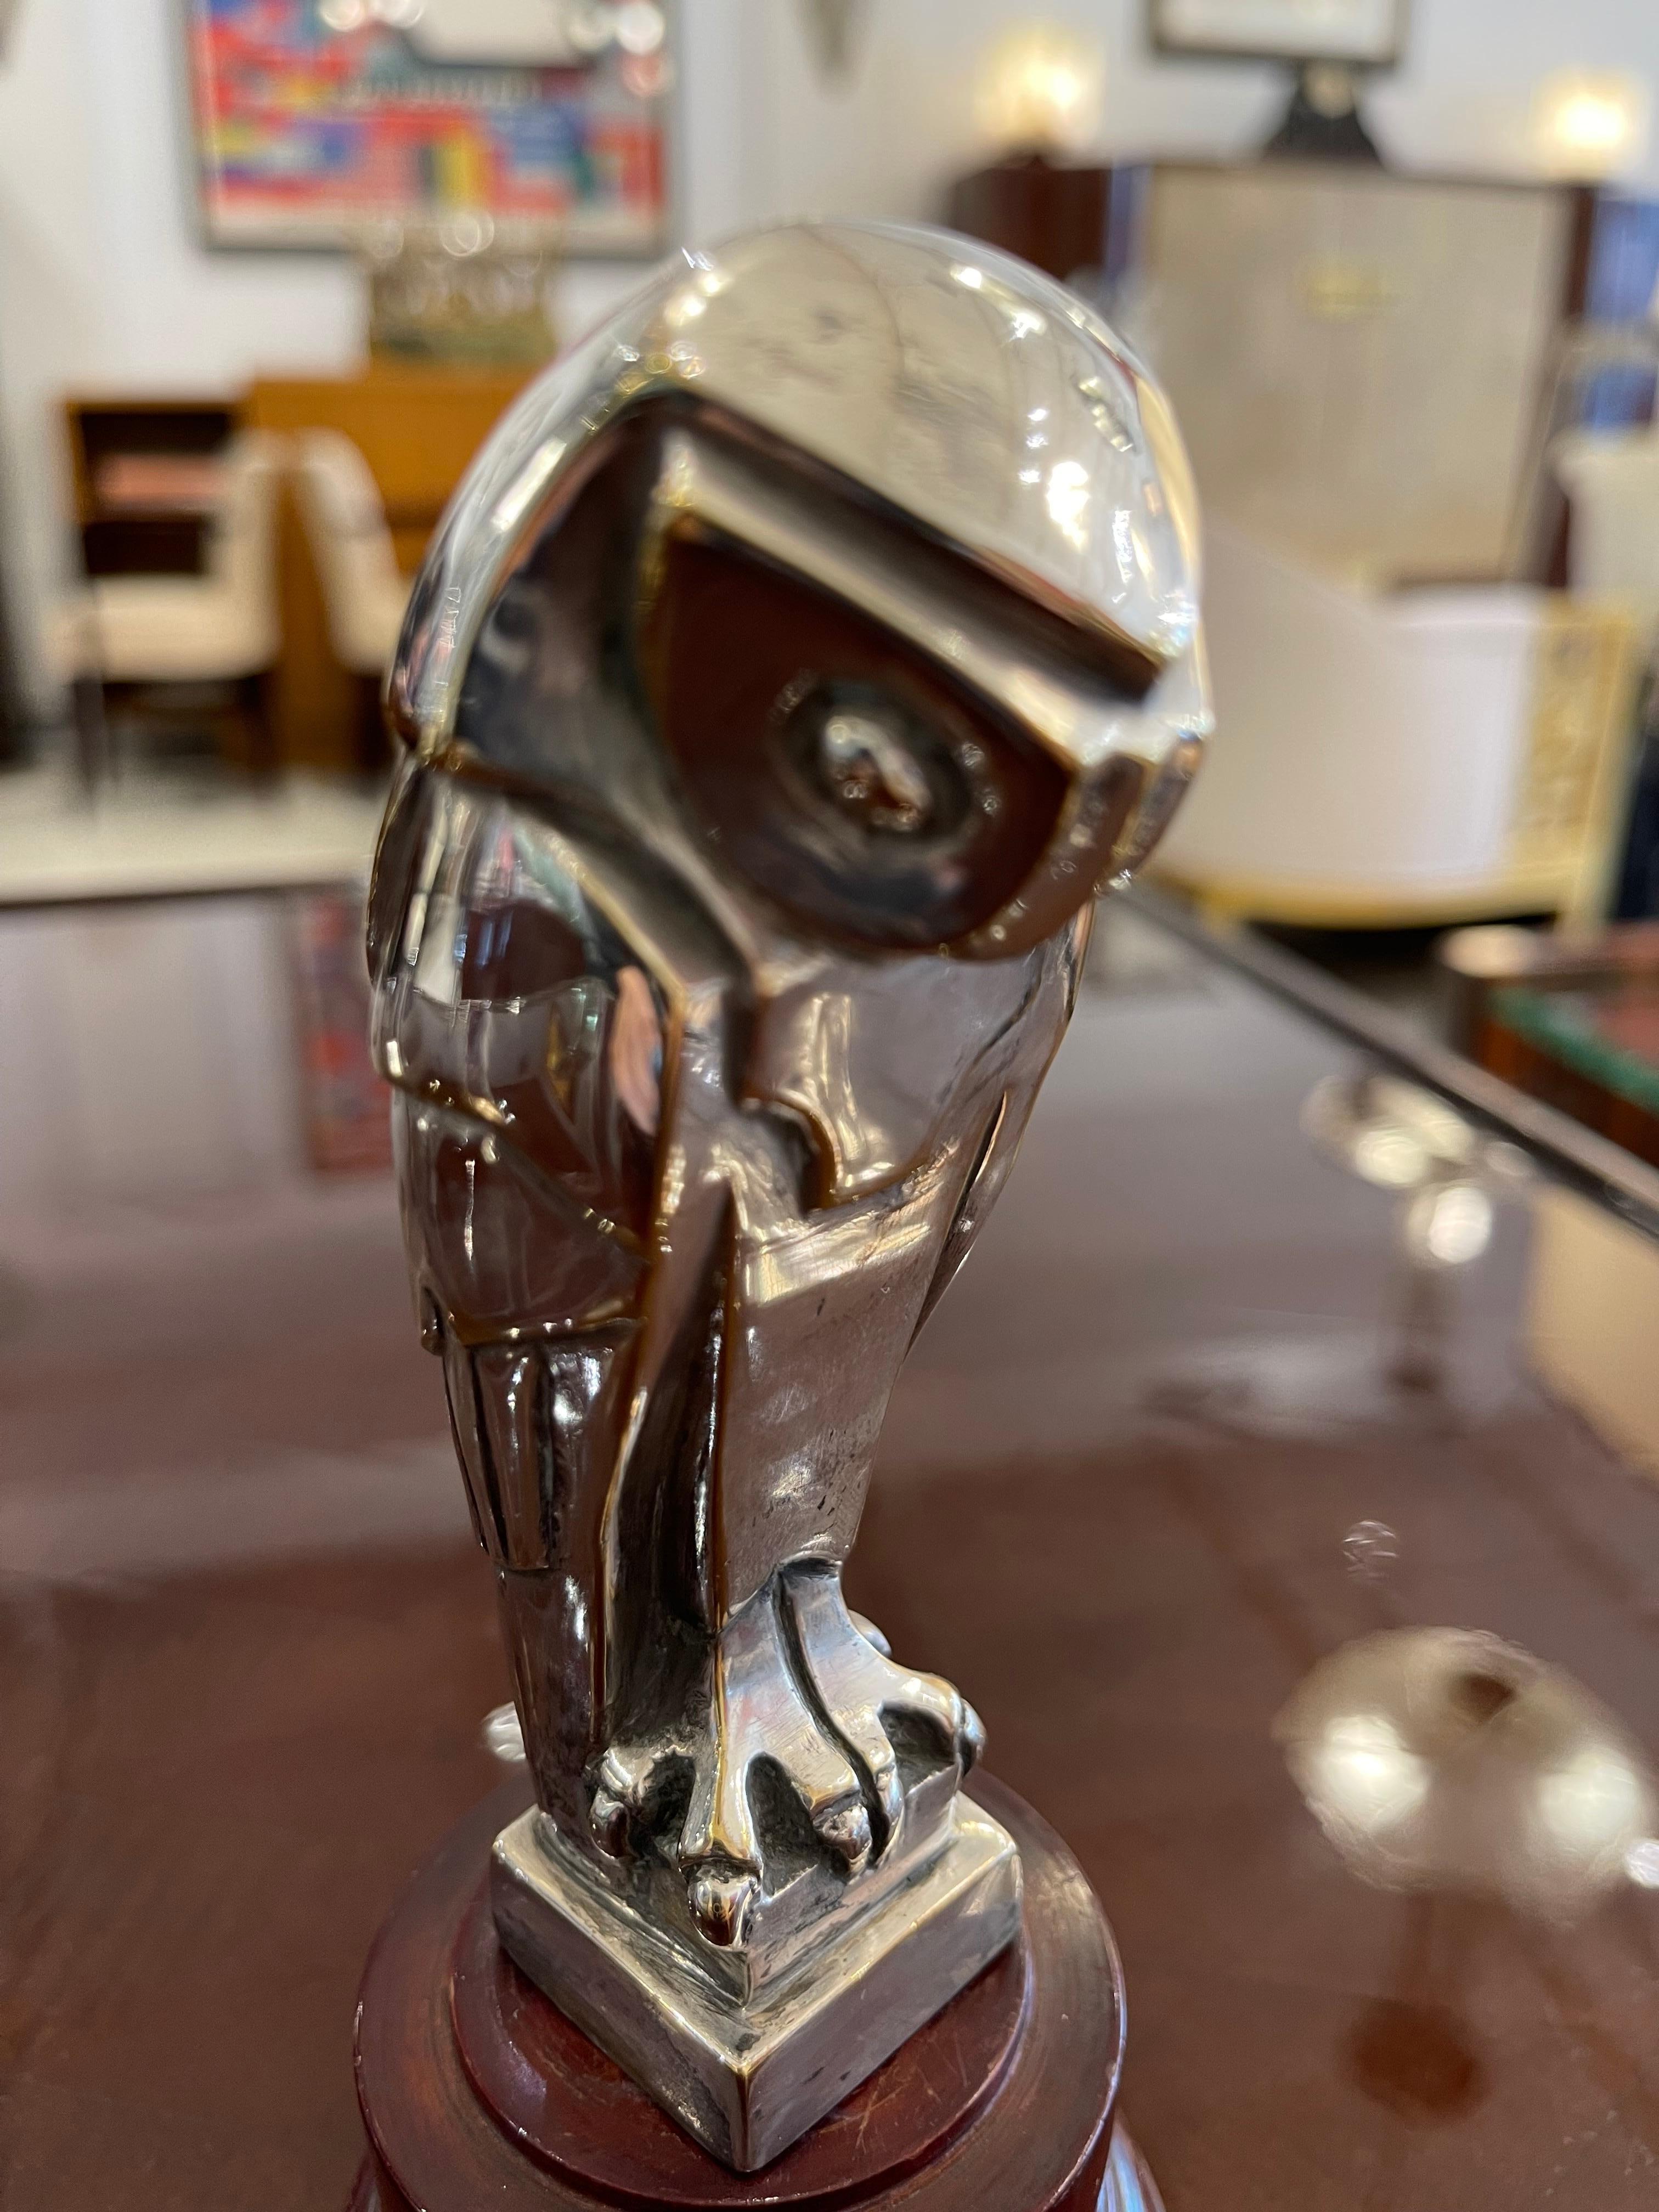 Art Deco Silver-Plated Bronze Car Mascot designed by E. Sandoz depicting an owl on a wood base.
Made in France 
Circa: 1930
Signature: Ed M. Sandoz.